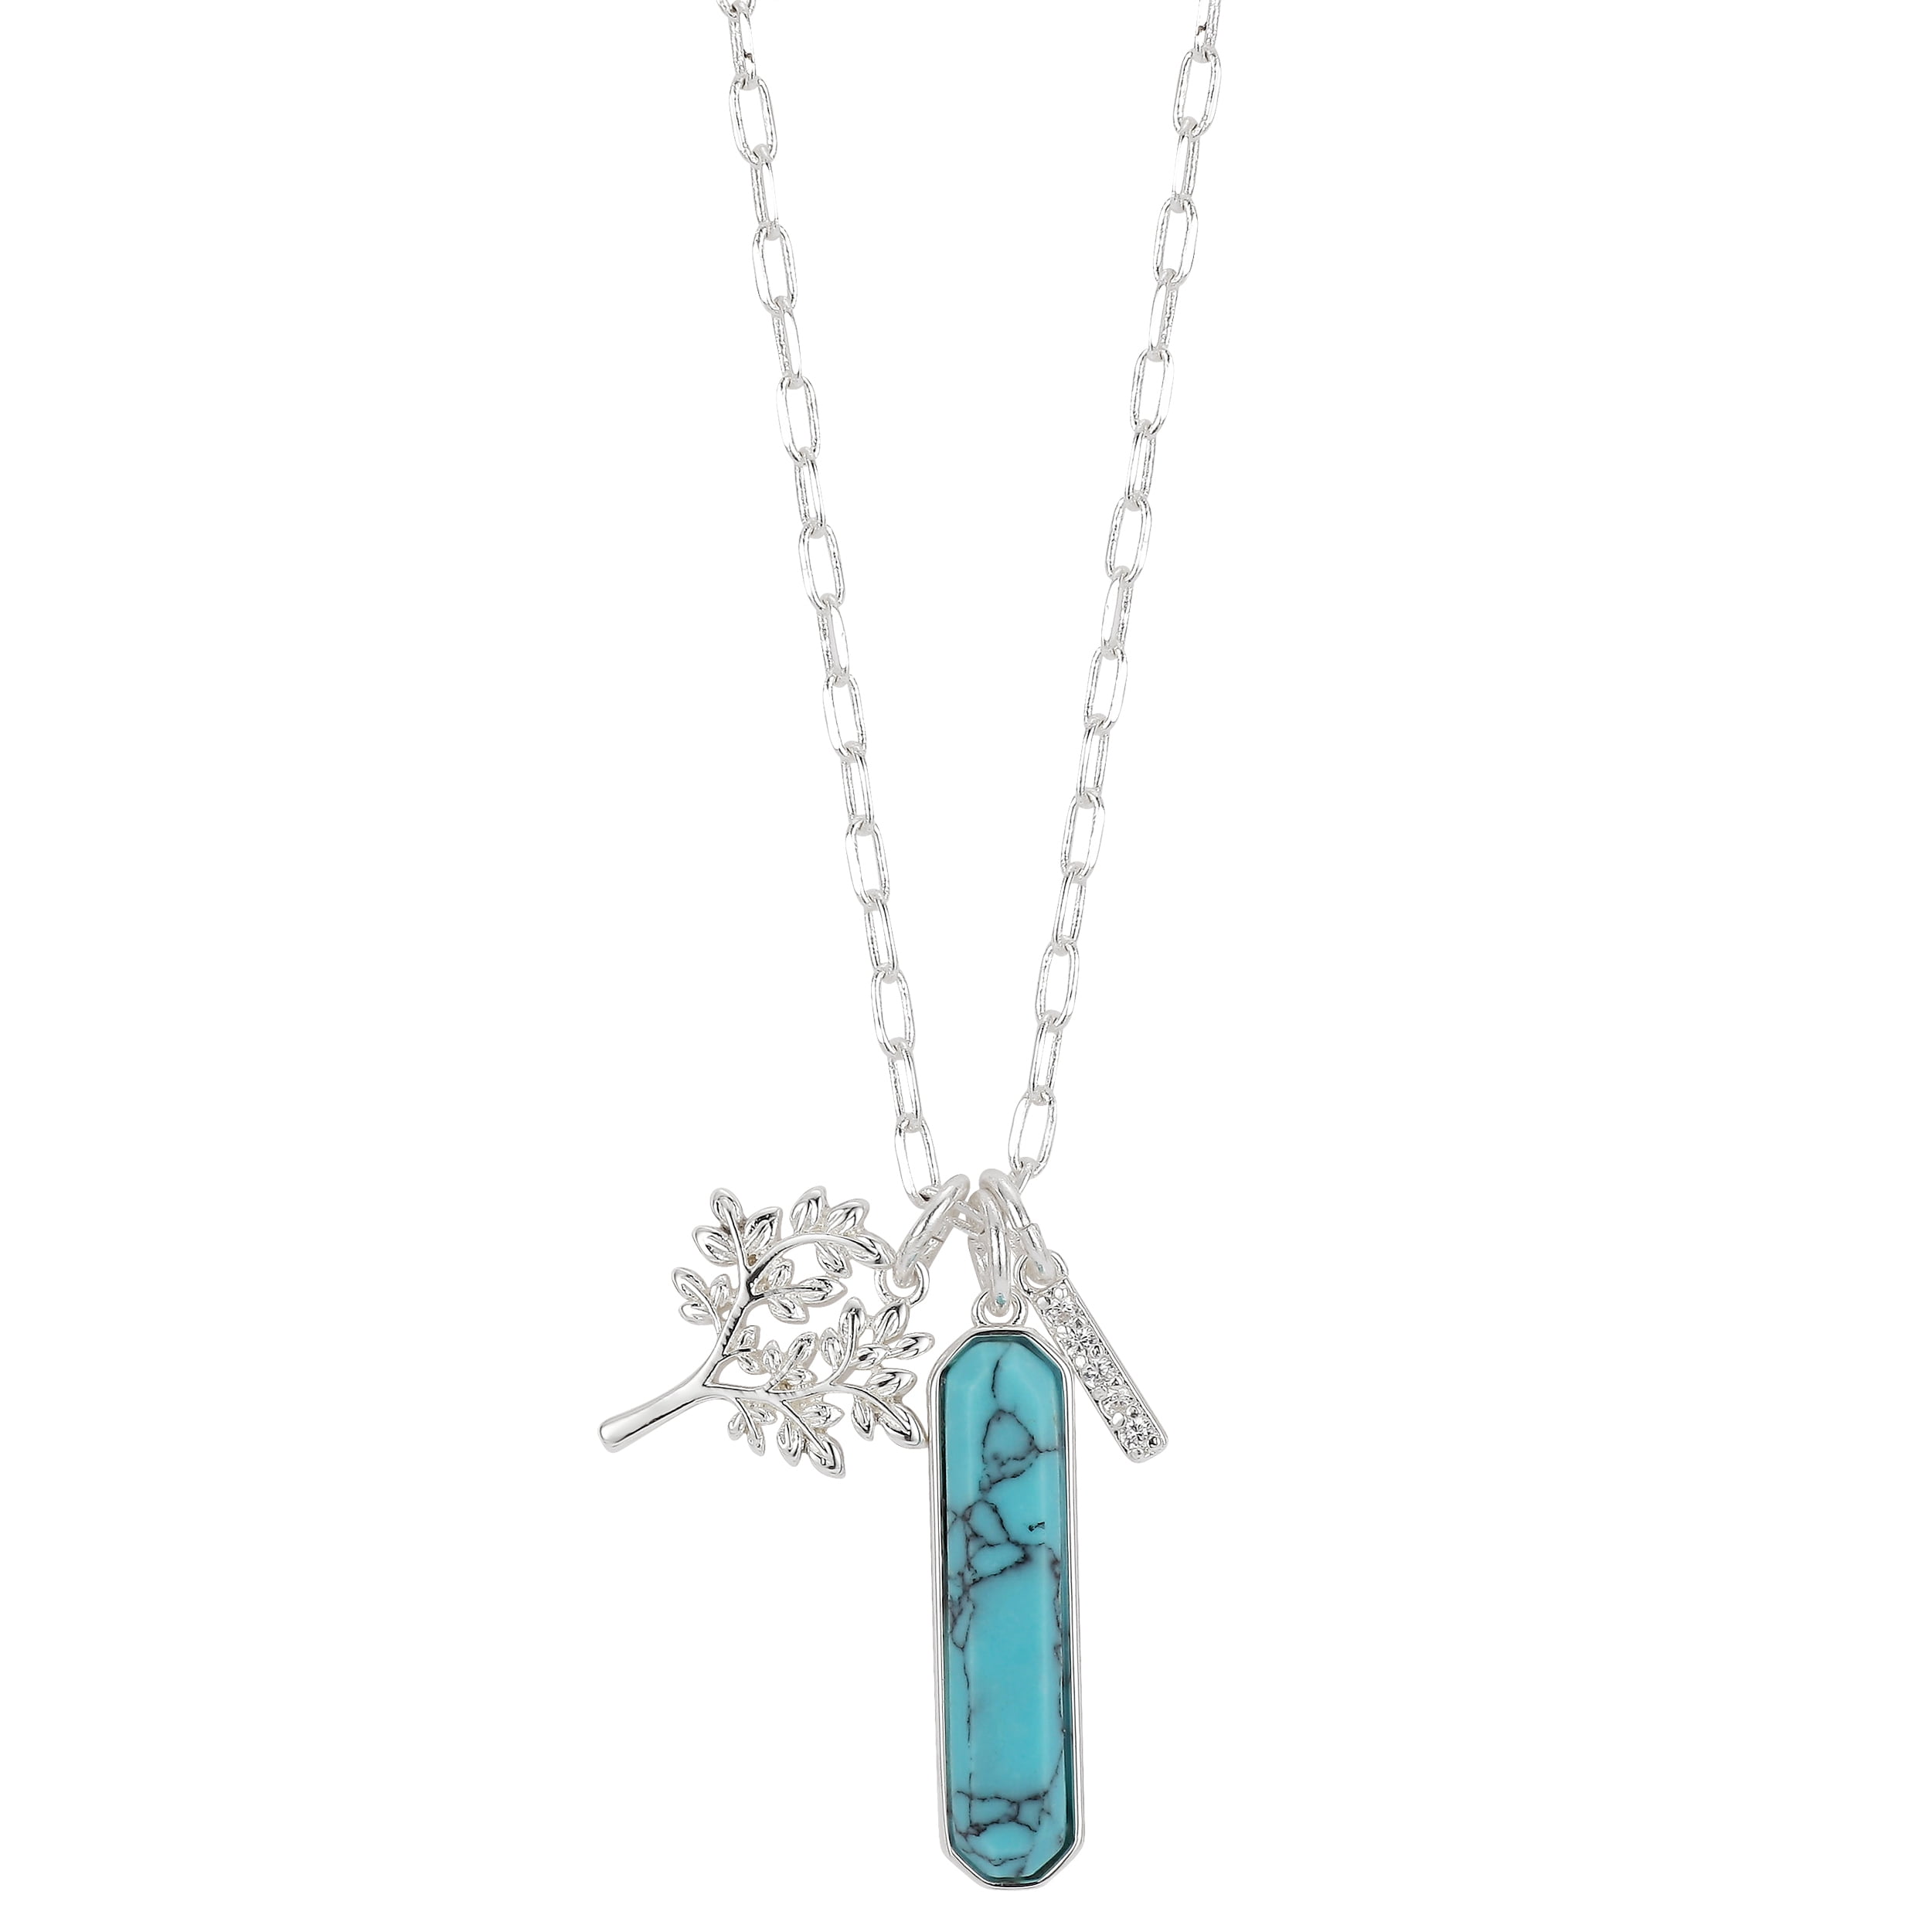 Crystal Stone Necklace Crystal Necklace Gold Necklace White Crystal Necklace Stone Necklace